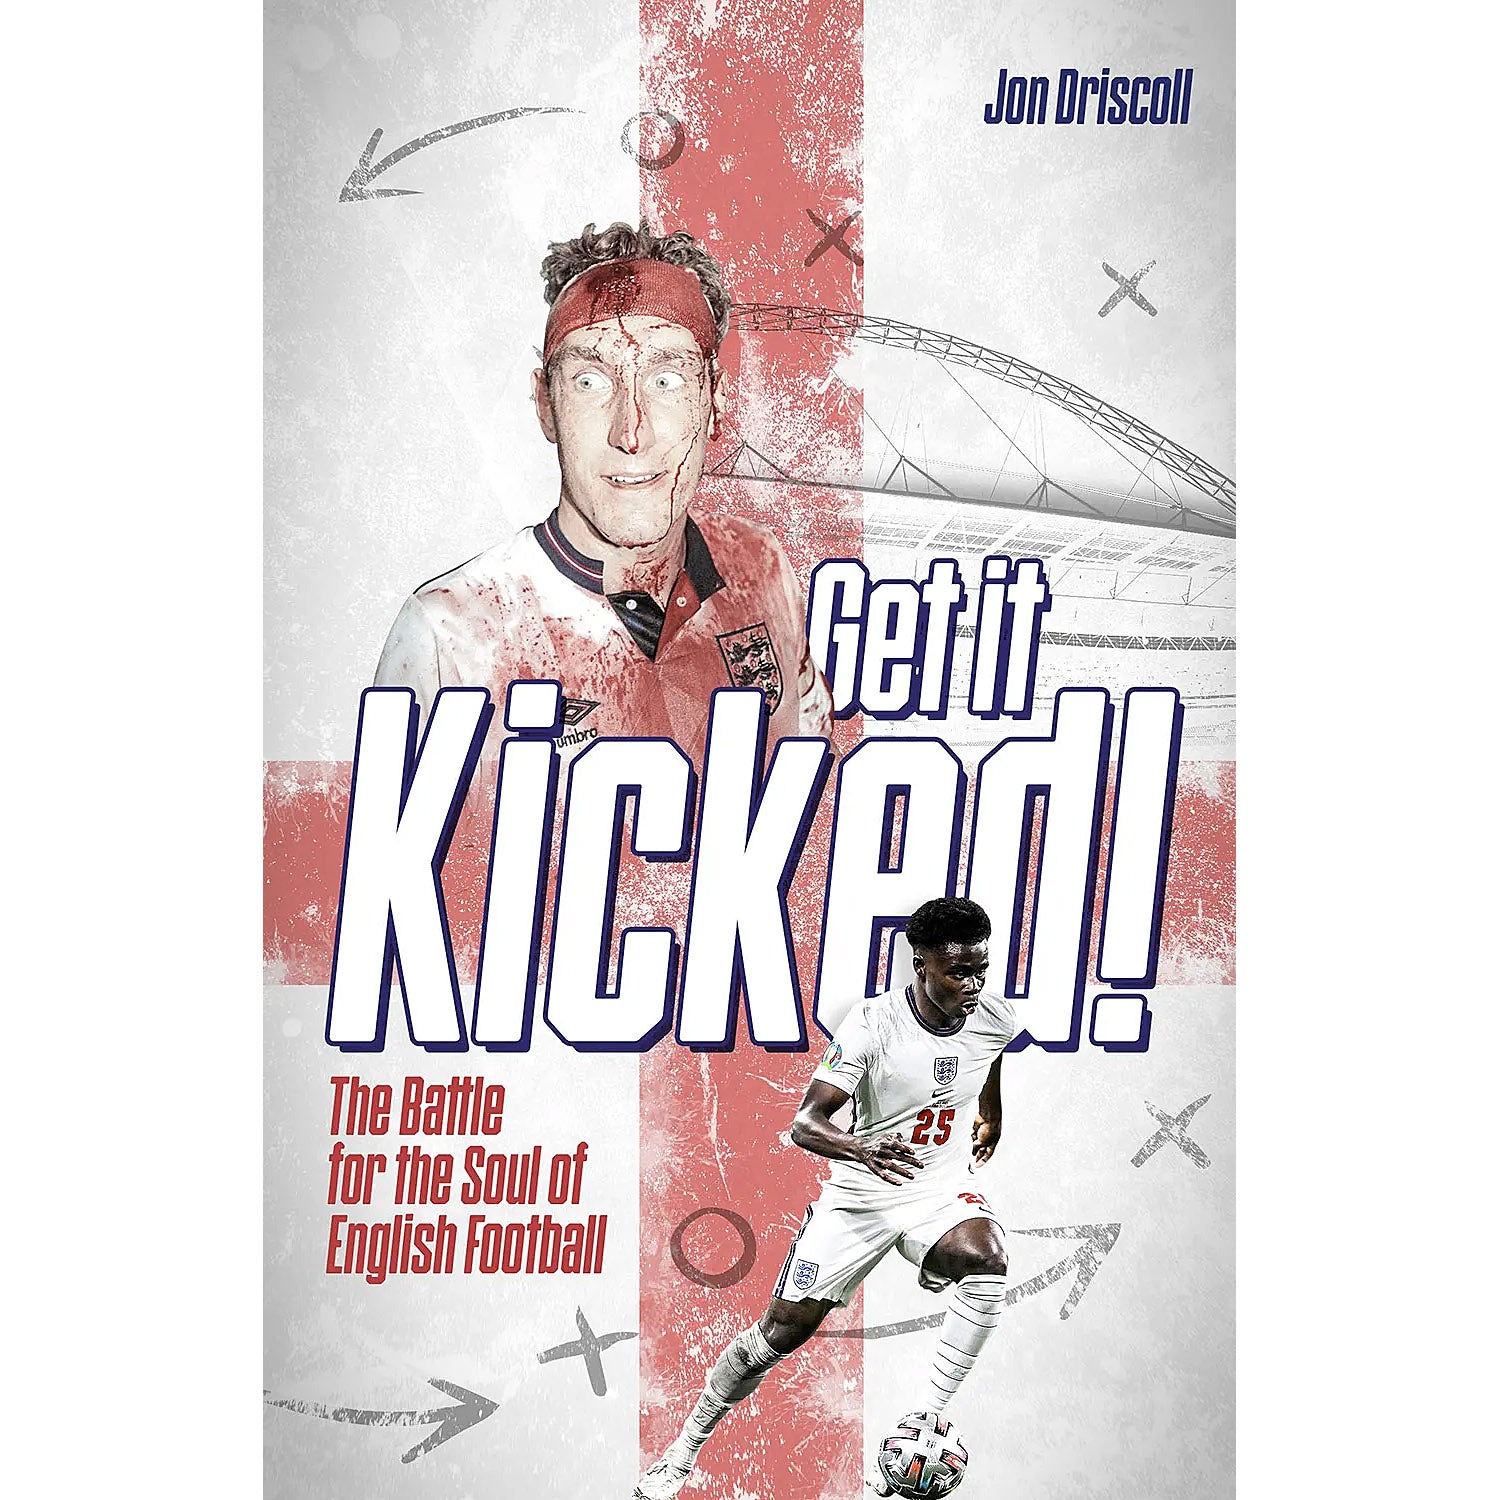 Get it Kicked! The Battle for the Soul of English Football